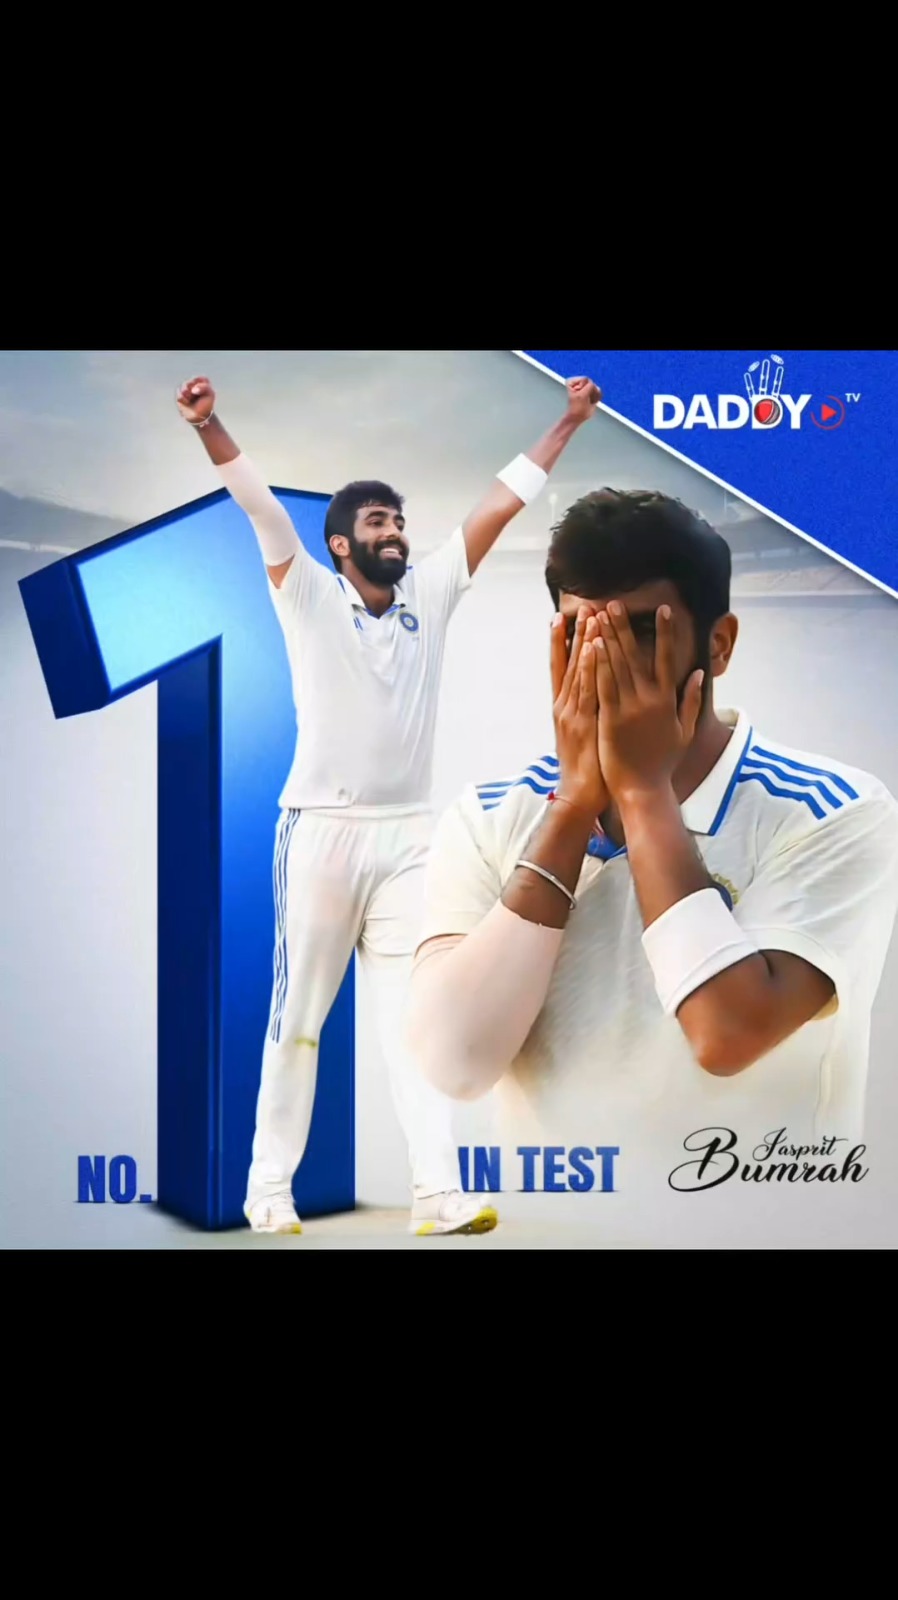 🔥😎The first bowler in history to rank #1 across all forms is Jasprit Bumrah.